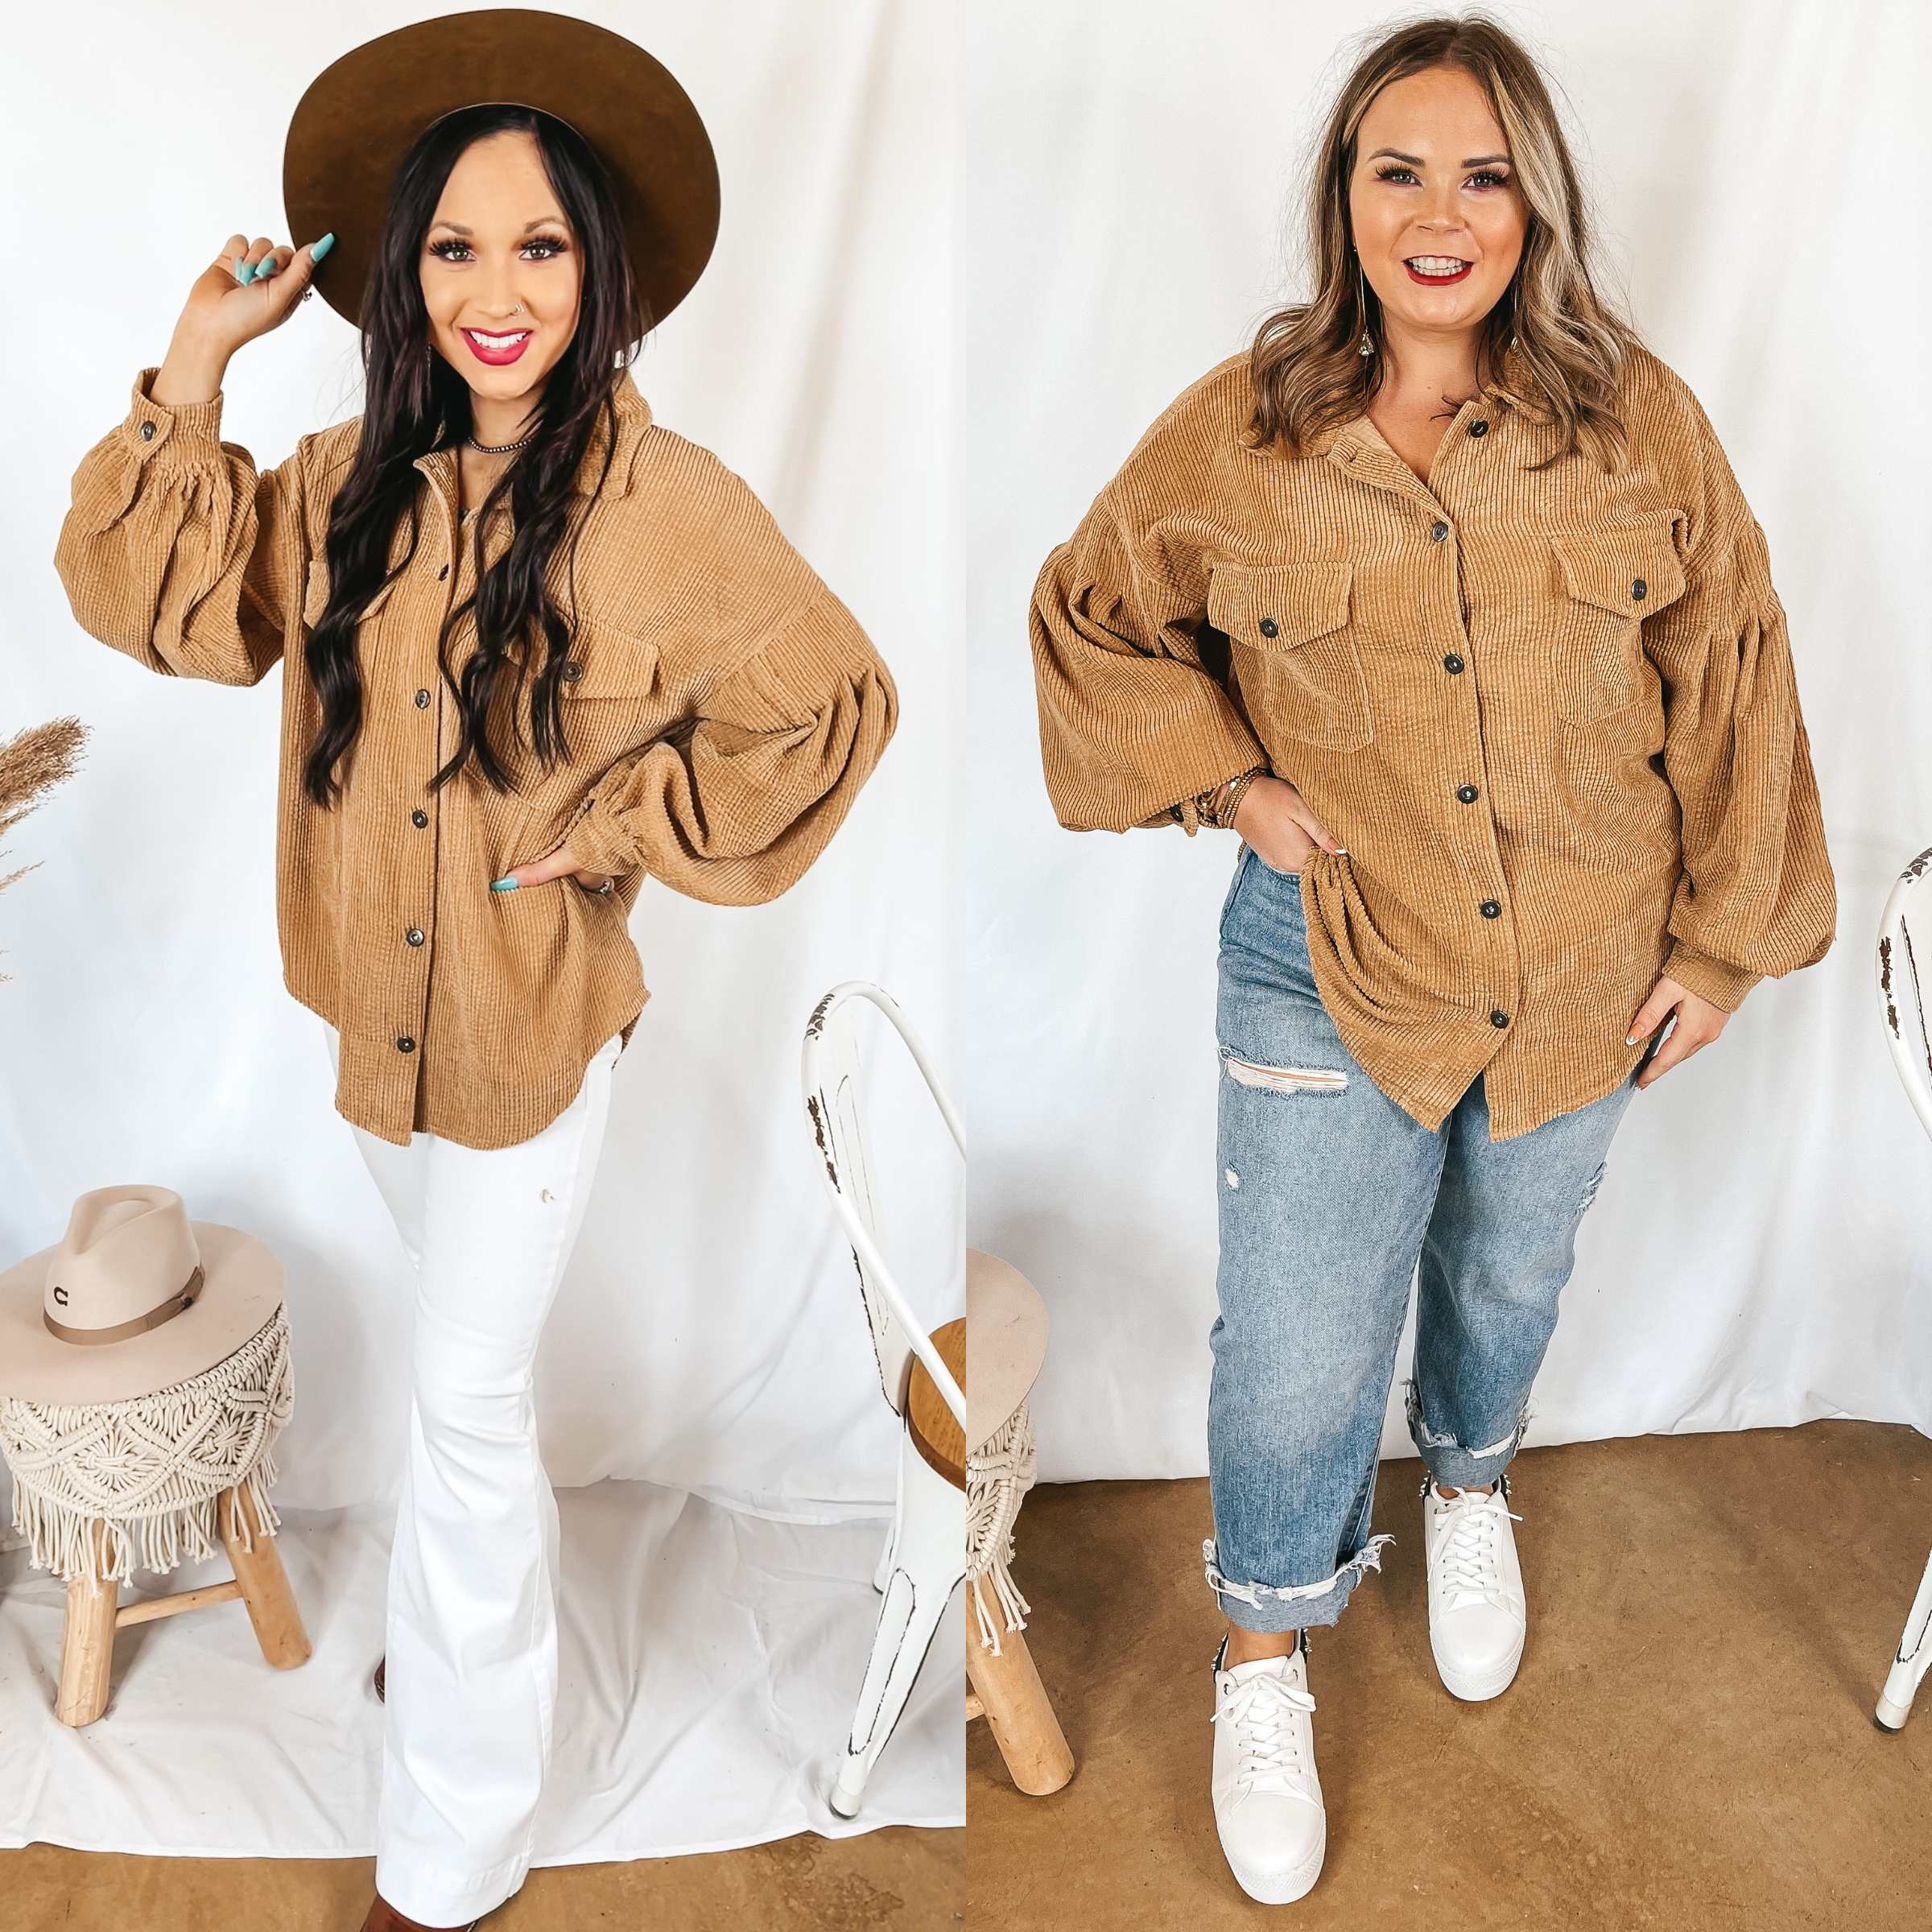 Models are wearing an oversized tan top with as button up front. Size small model has it paired with white flare jeans, brown booties, and a brown hat. Size large model has it paired with light wash jeans, white sneakers, and silver jewelry.